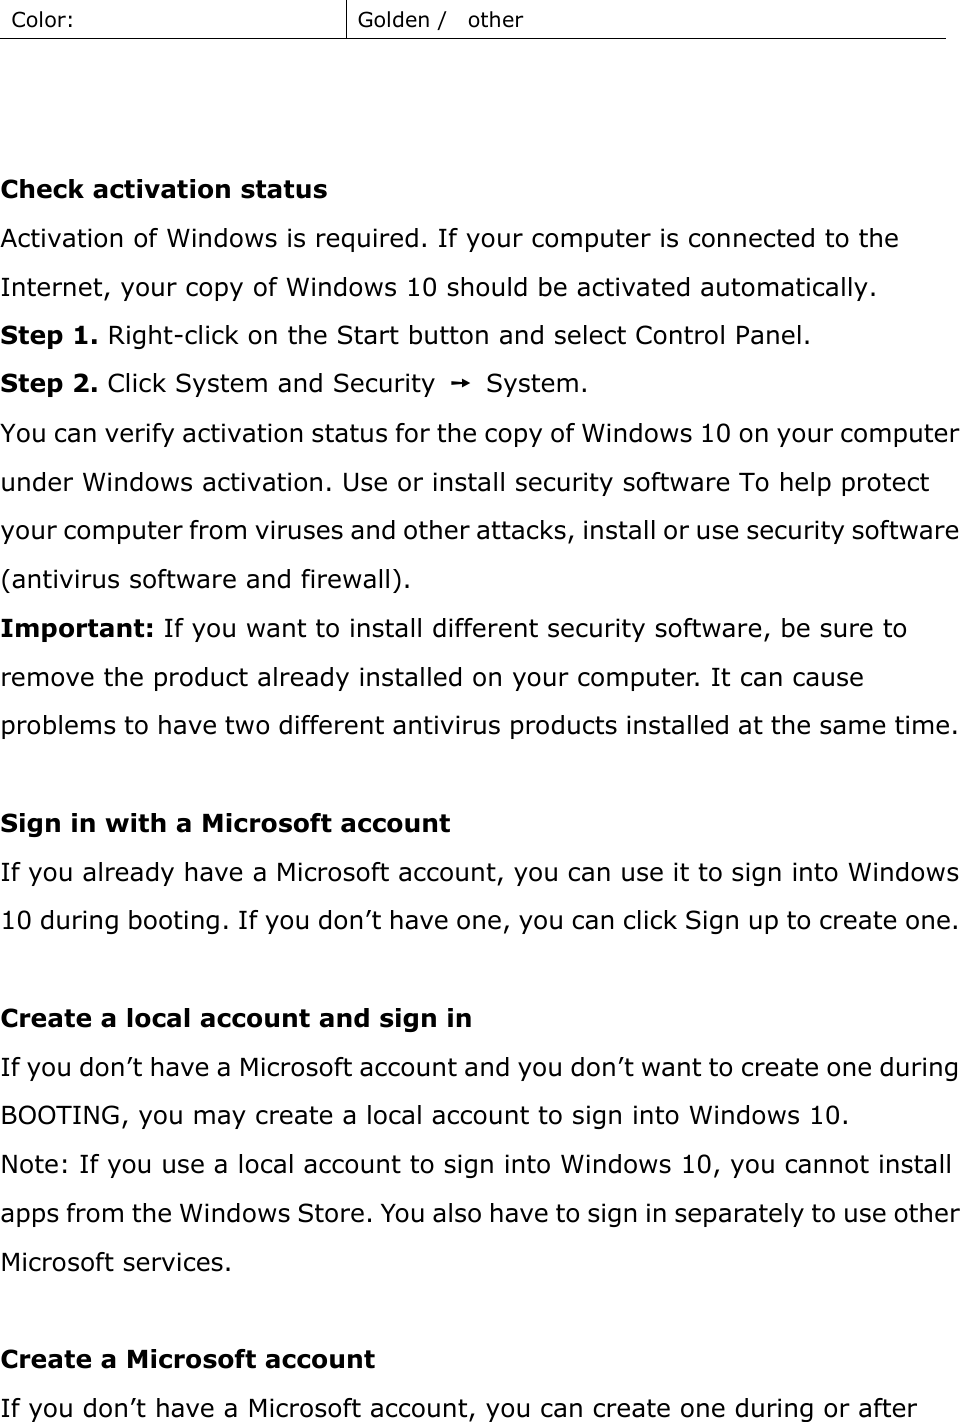 Color:  Golden /    other      Check activation status   Activation of Windows is required. If your computer is connected to the Internet, your copy of Windows 10 should be activated automatically.   Step 1. Right-click on the Start button and select Control Panel.   Step 2. Click System and Security  ➙  System. You can verify activation status for the copy of Windows 10 on your computer under Windows activation. Use or install security software To help protect your computer from viruses and other attacks, install or use security software (antivirus software and firewall). Important: If you want to install different security software, be sure to remove the product already installed on your computer. It can cause problems to have two different antivirus products installed at the same time.  Sign in with a Microsoft account If you already have a Microsoft account, you can use it to sign into Windows 10 during booting. If you don’t have one, you can click Sign up to create one.    Create a local account and sign in   If you don’t have a Microsoft account and you don’t want to create one during BOOTING, you may create a local account to sign into Windows 10.   Note: If you use a local account to sign into Windows 10, you cannot install apps from the Windows Store. You also have to sign in separately to use other Microsoft services.    Create a Microsoft account   If you don’t have a Microsoft account, you can create one during or after 